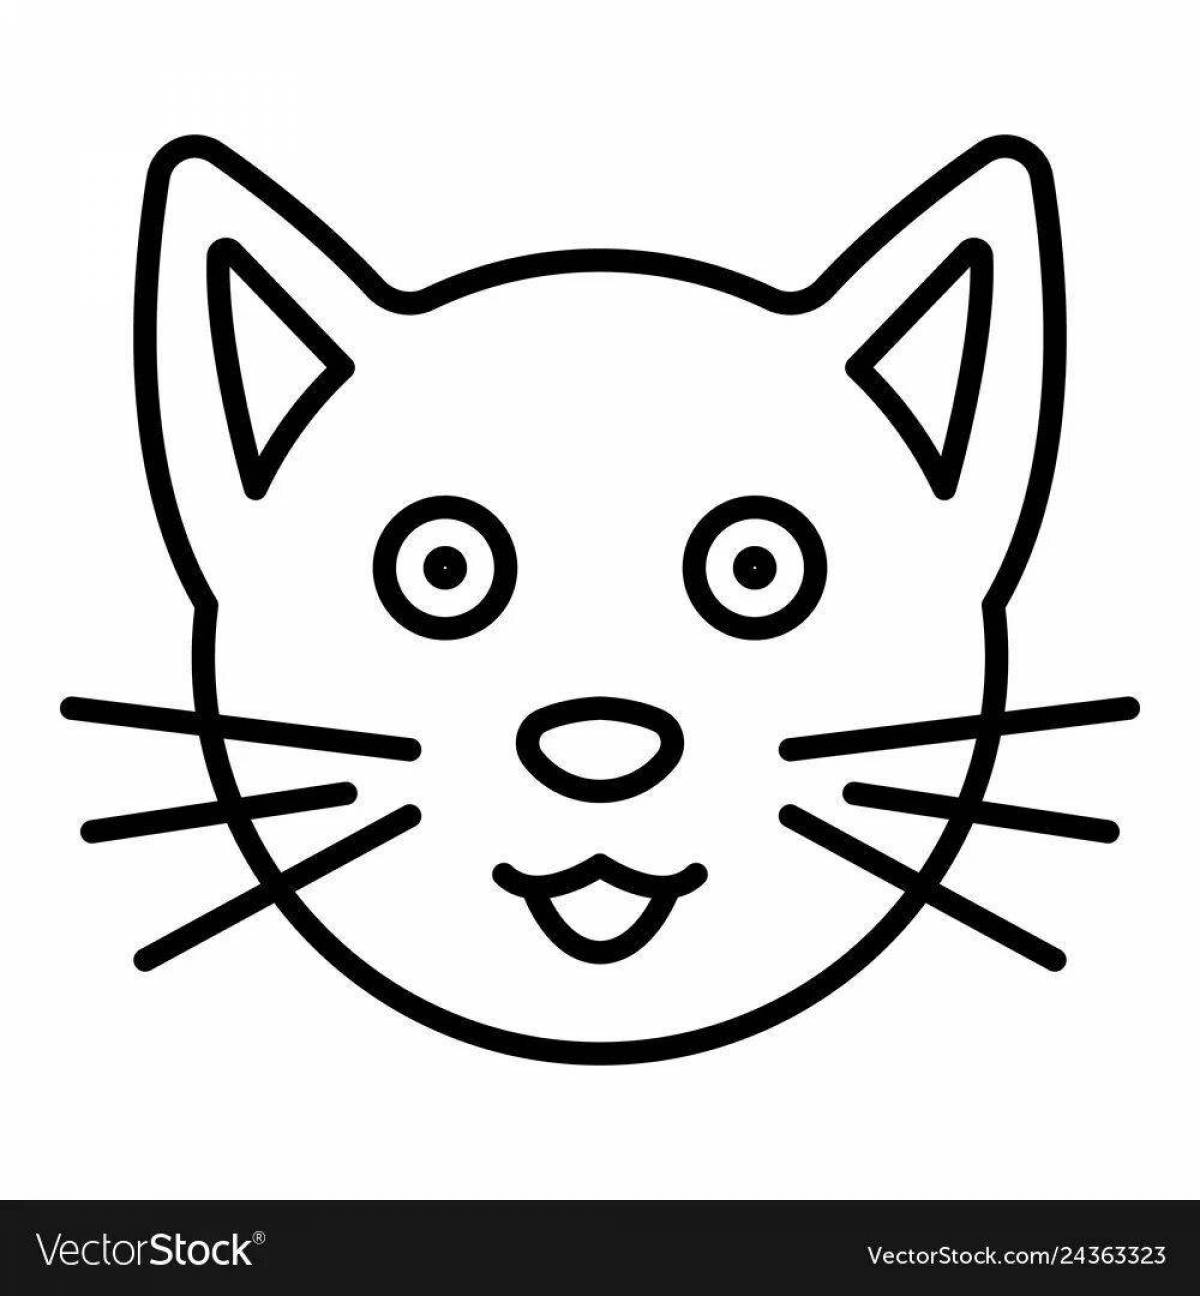 Coloring book shining cat face for kids